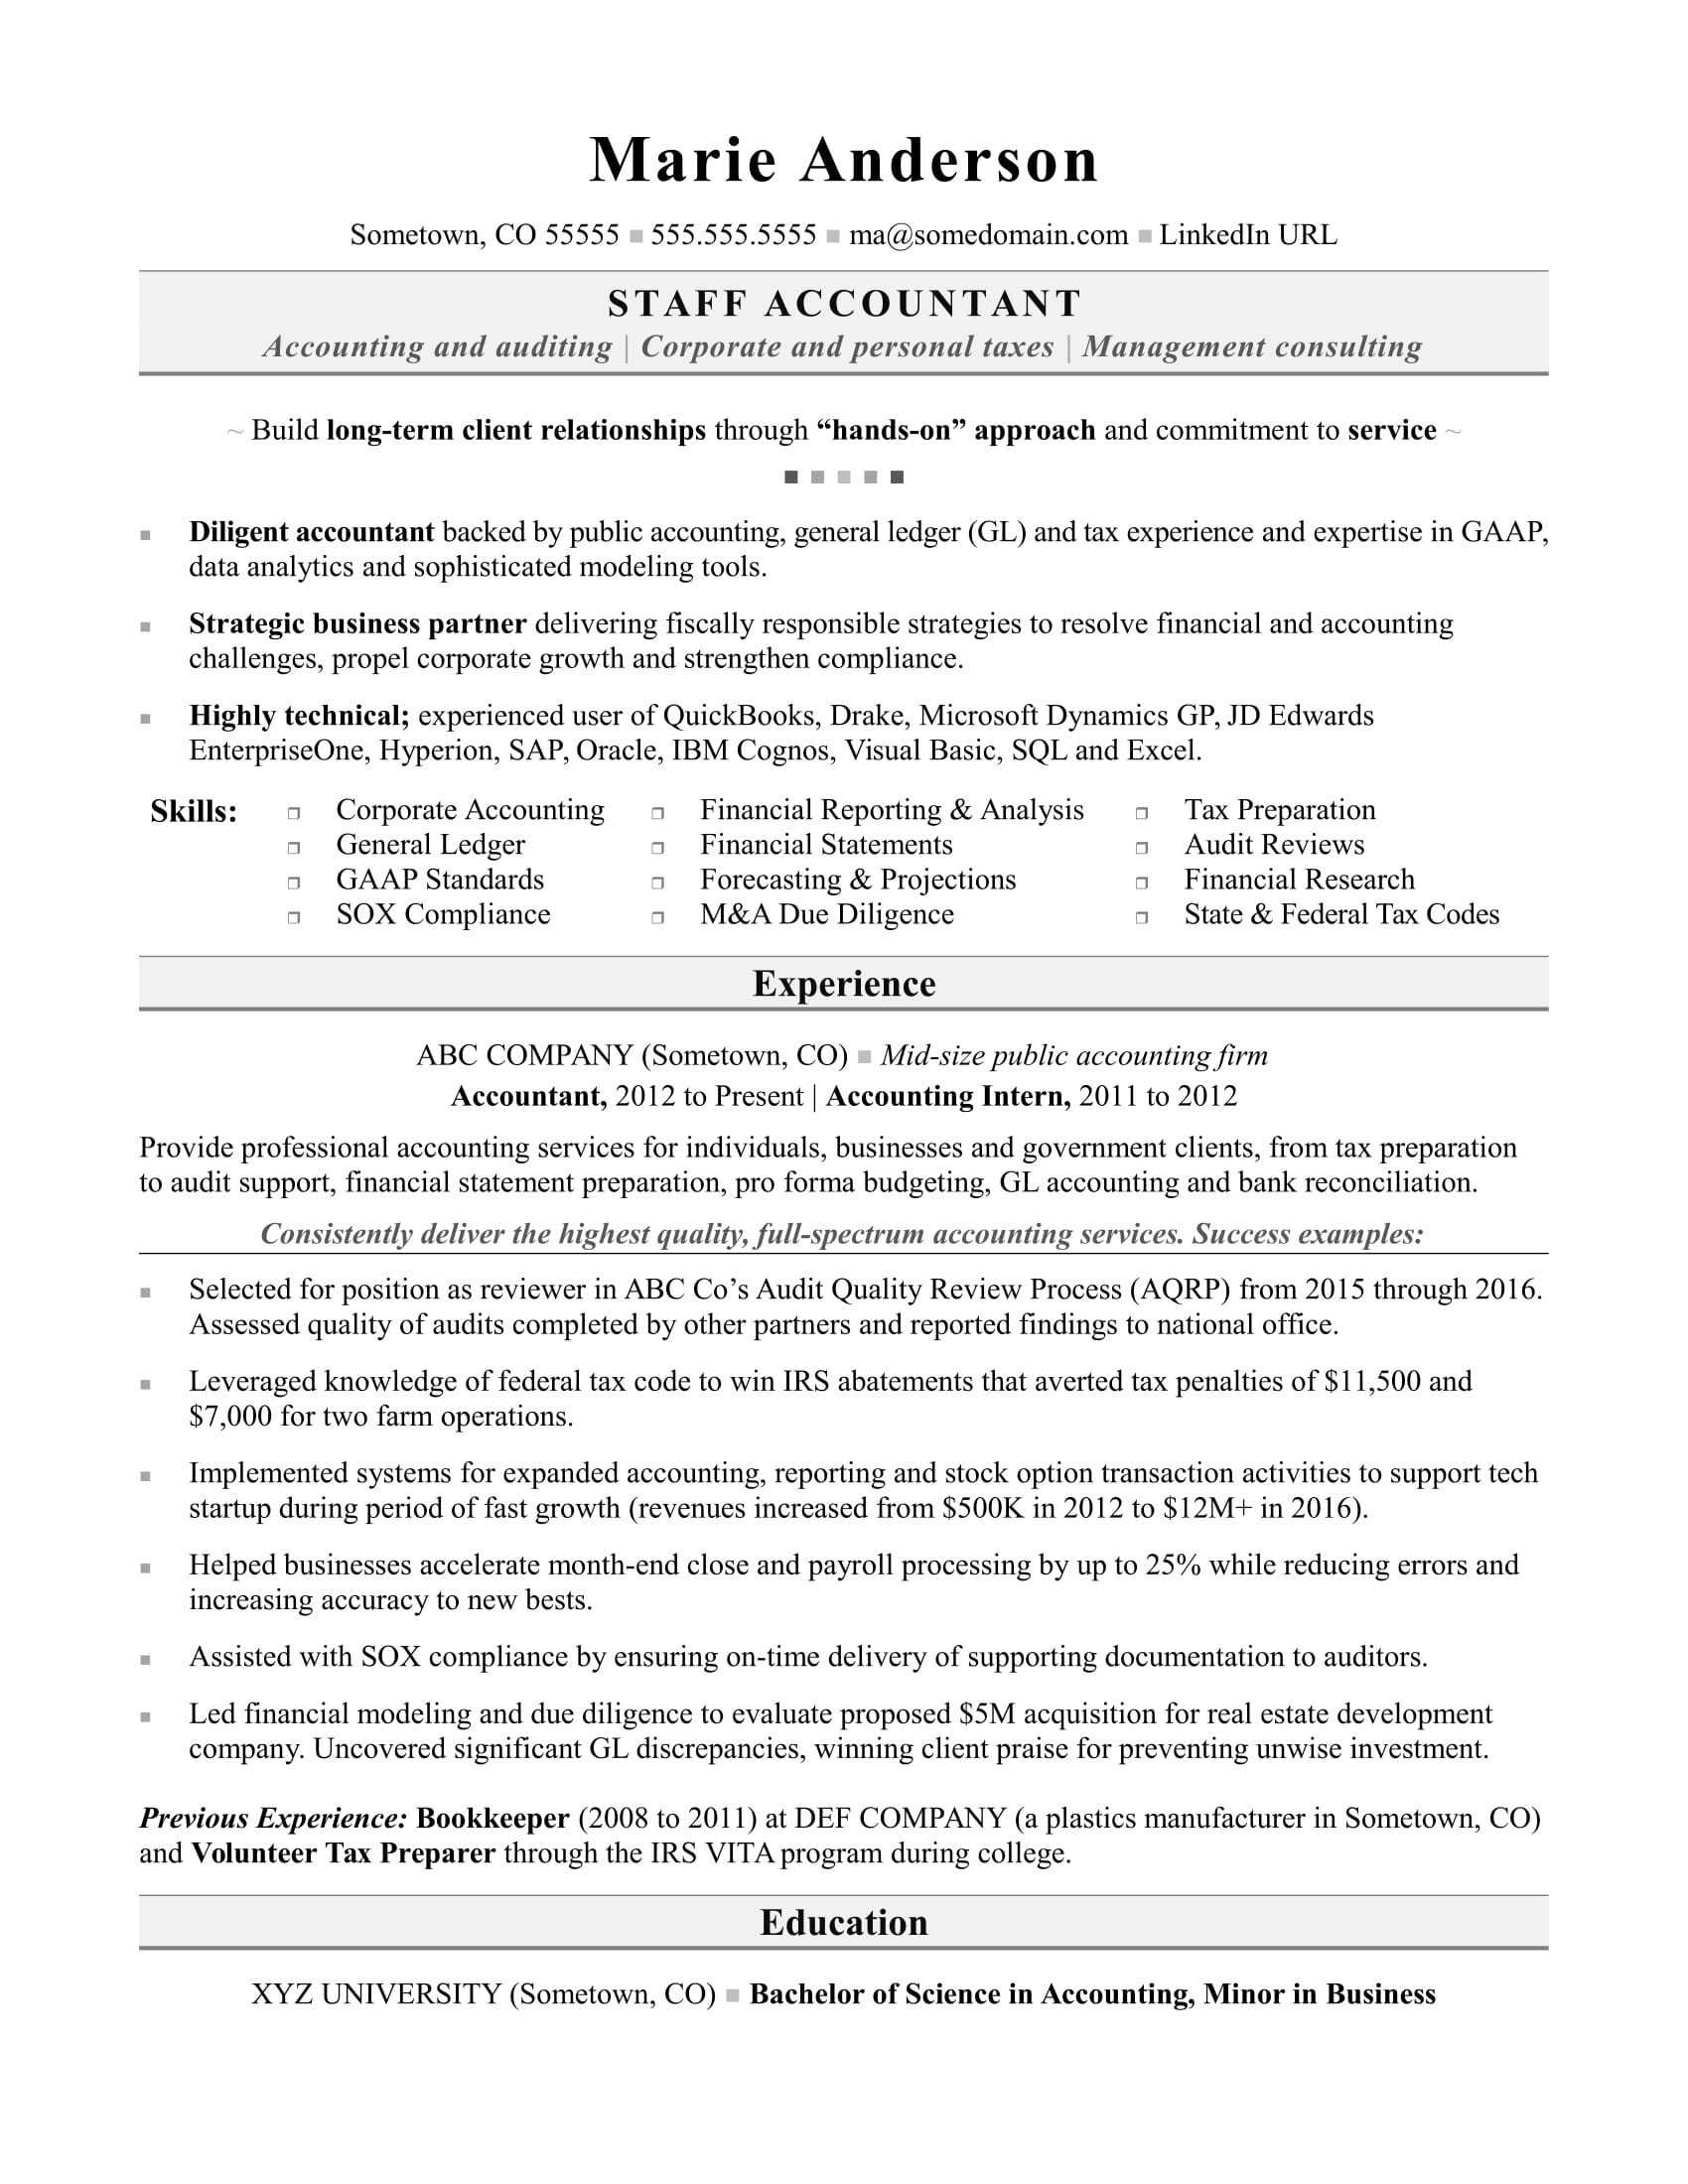 Sample Entry Level Accountant Resume Objective Accountant Resume Monster.com